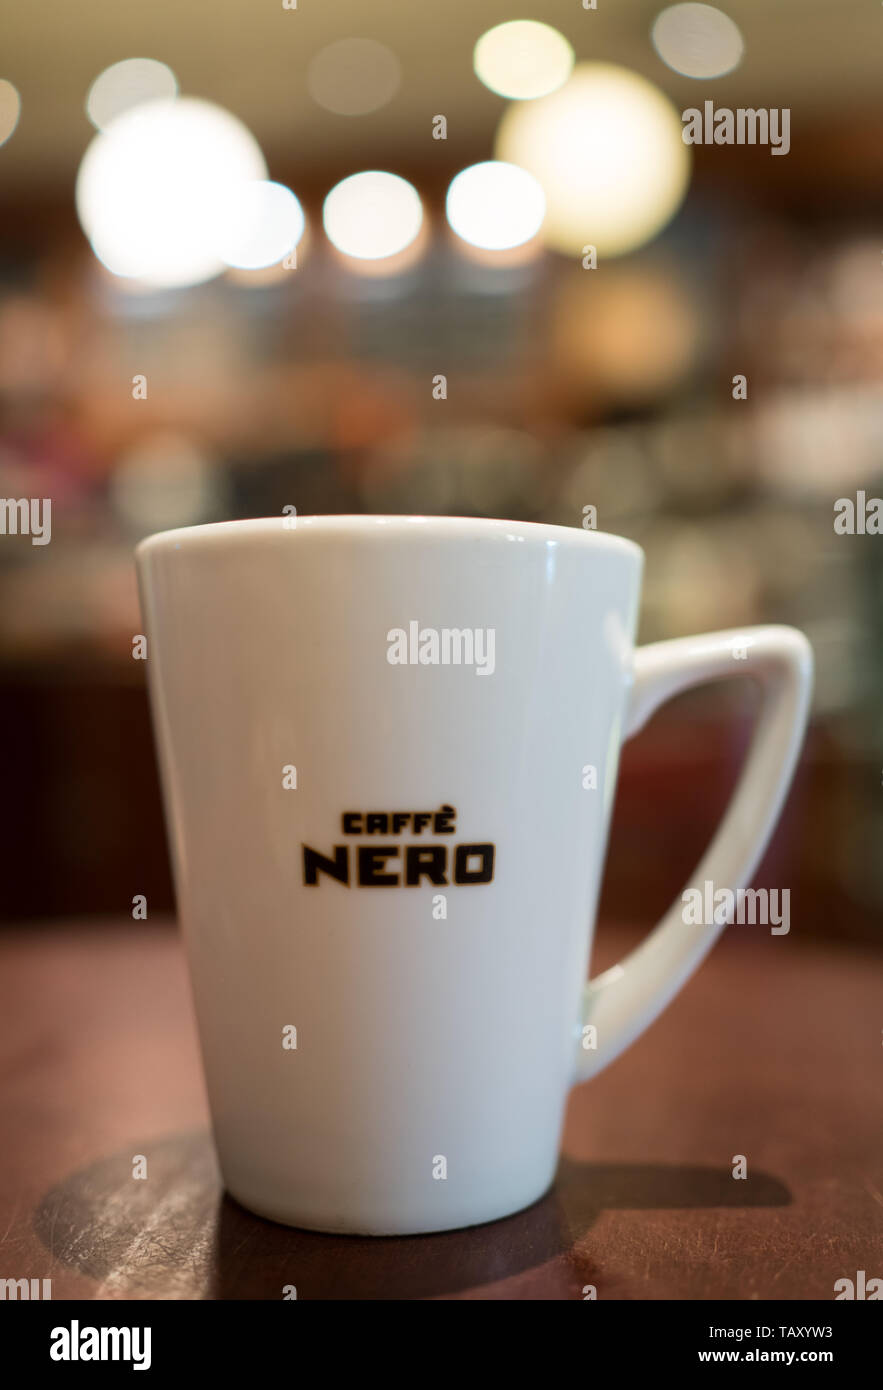 https://c8.alamy.com/comp/TAXYW3/mug-of-cappuccino-at-caffe-nero-in-waterstones-bournemouth-with-bokeh-TAXYW3.jpg